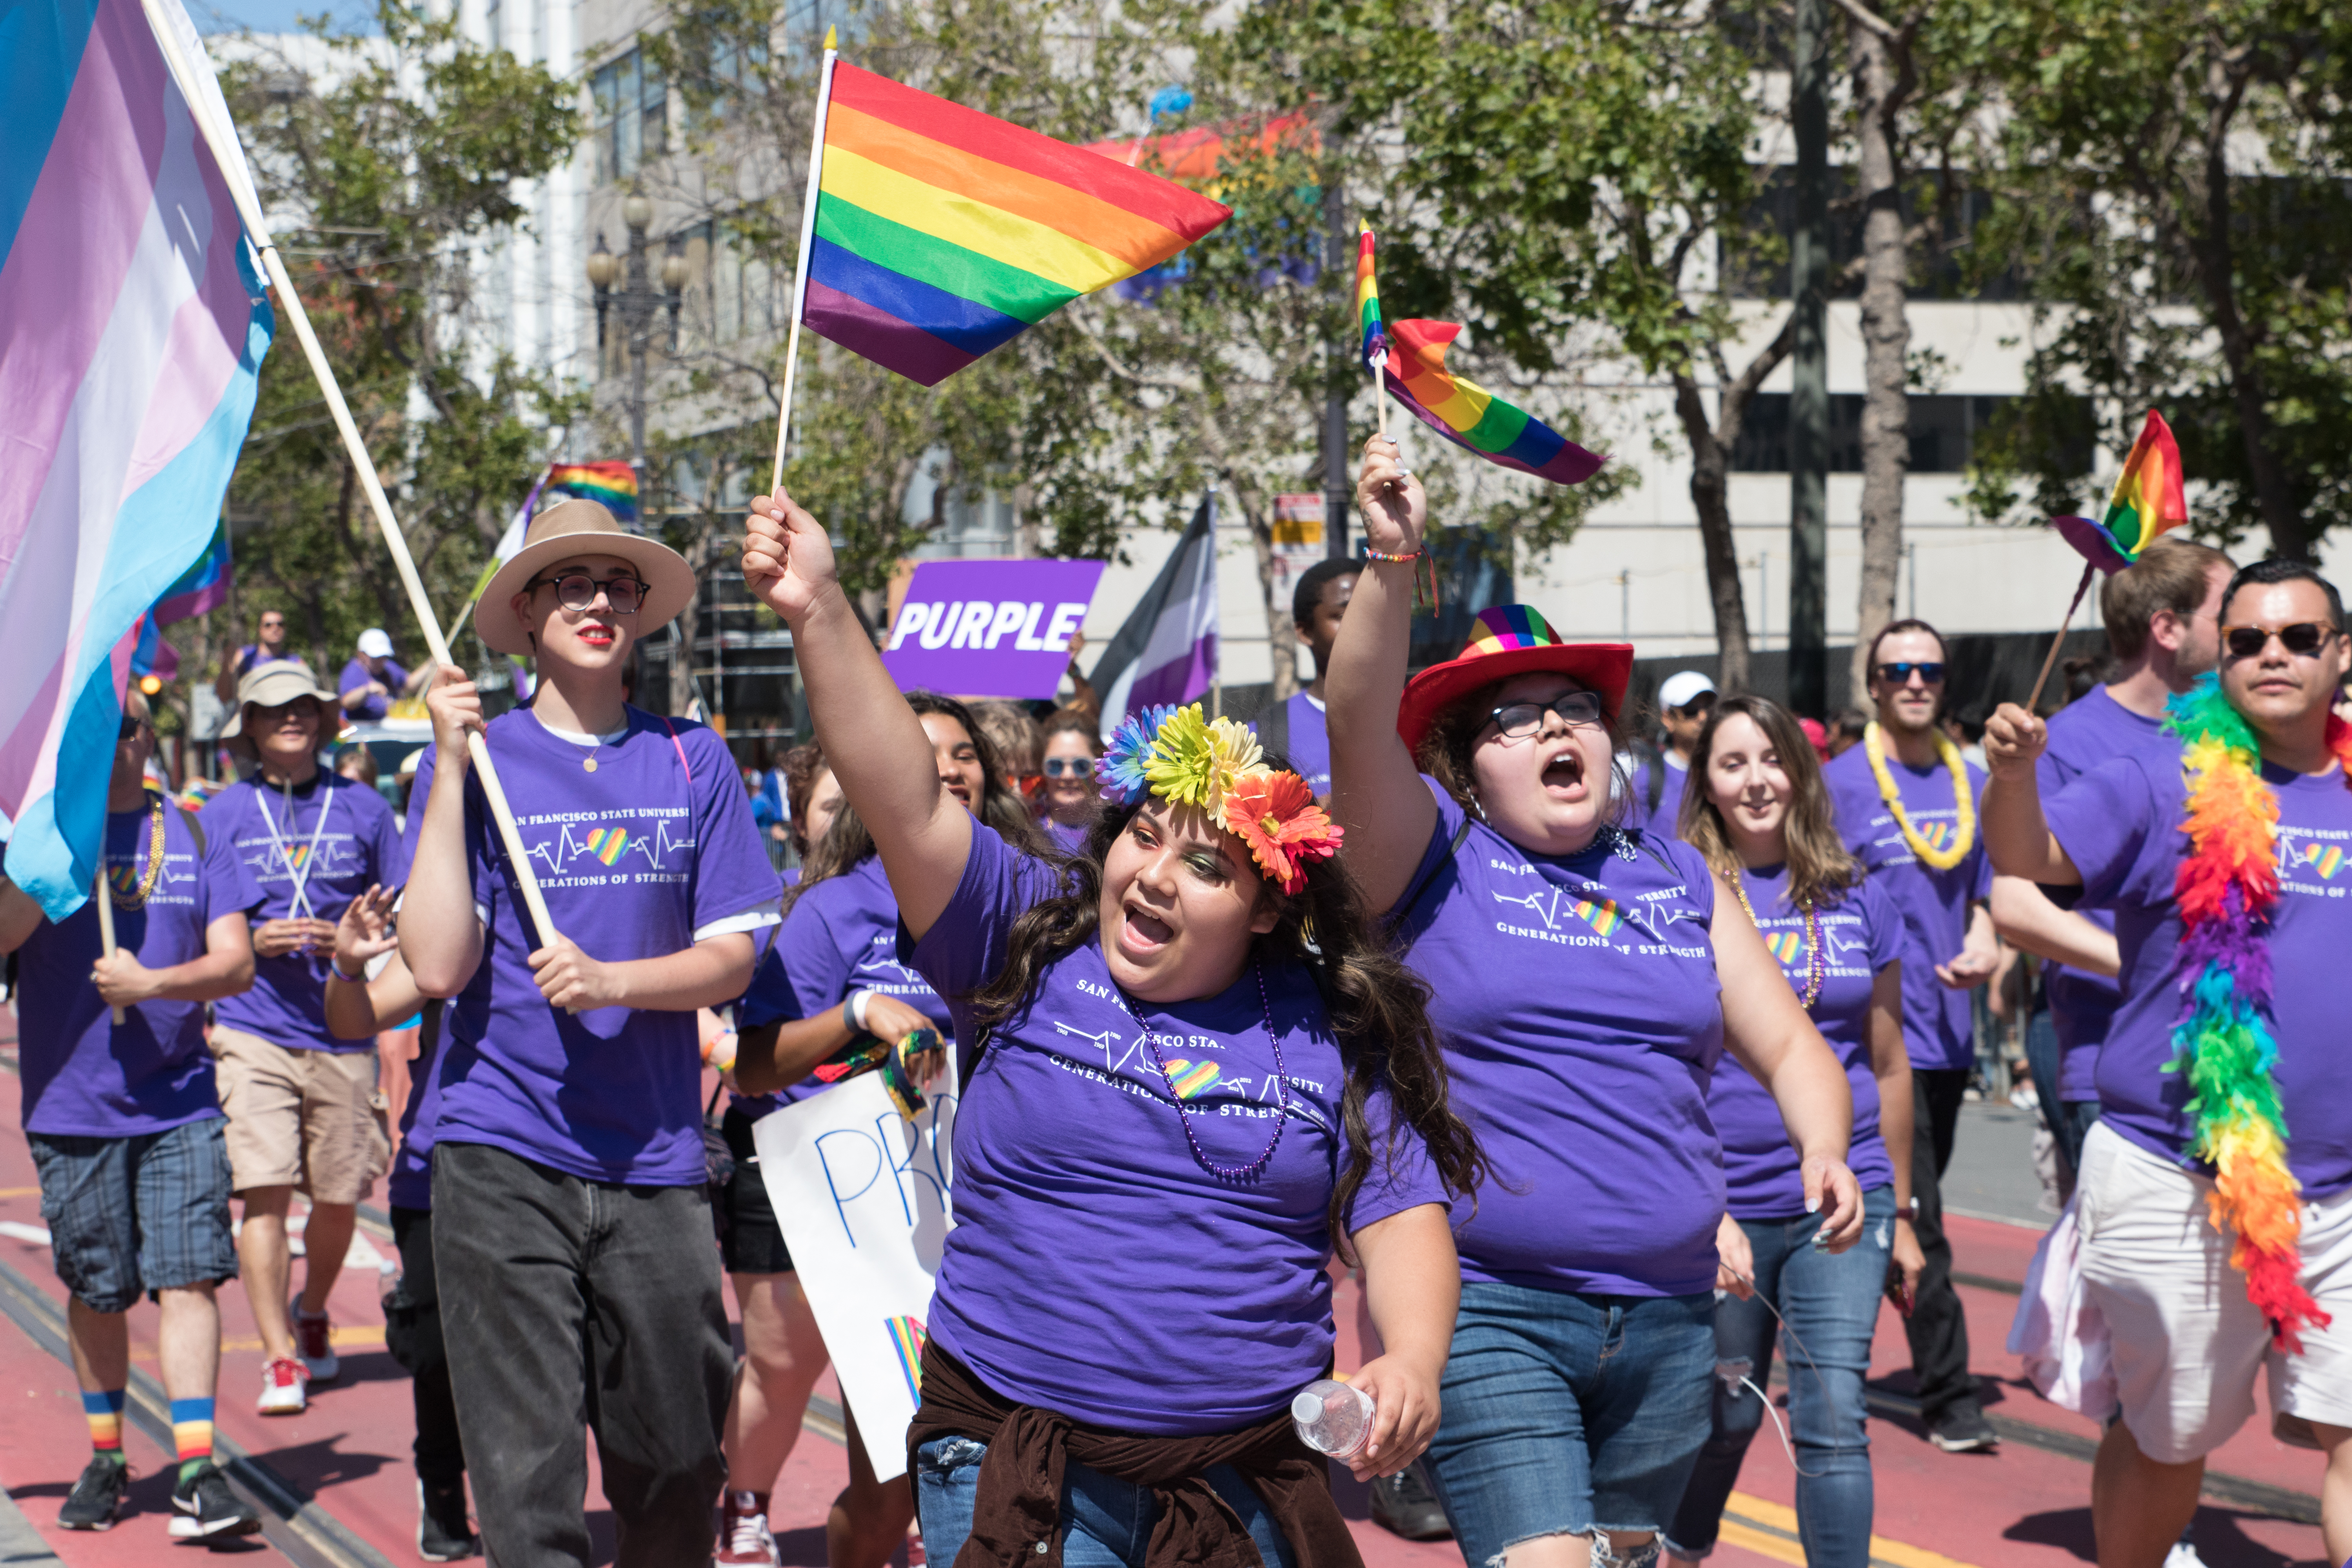 Students wave rainbow pride flags in a parade